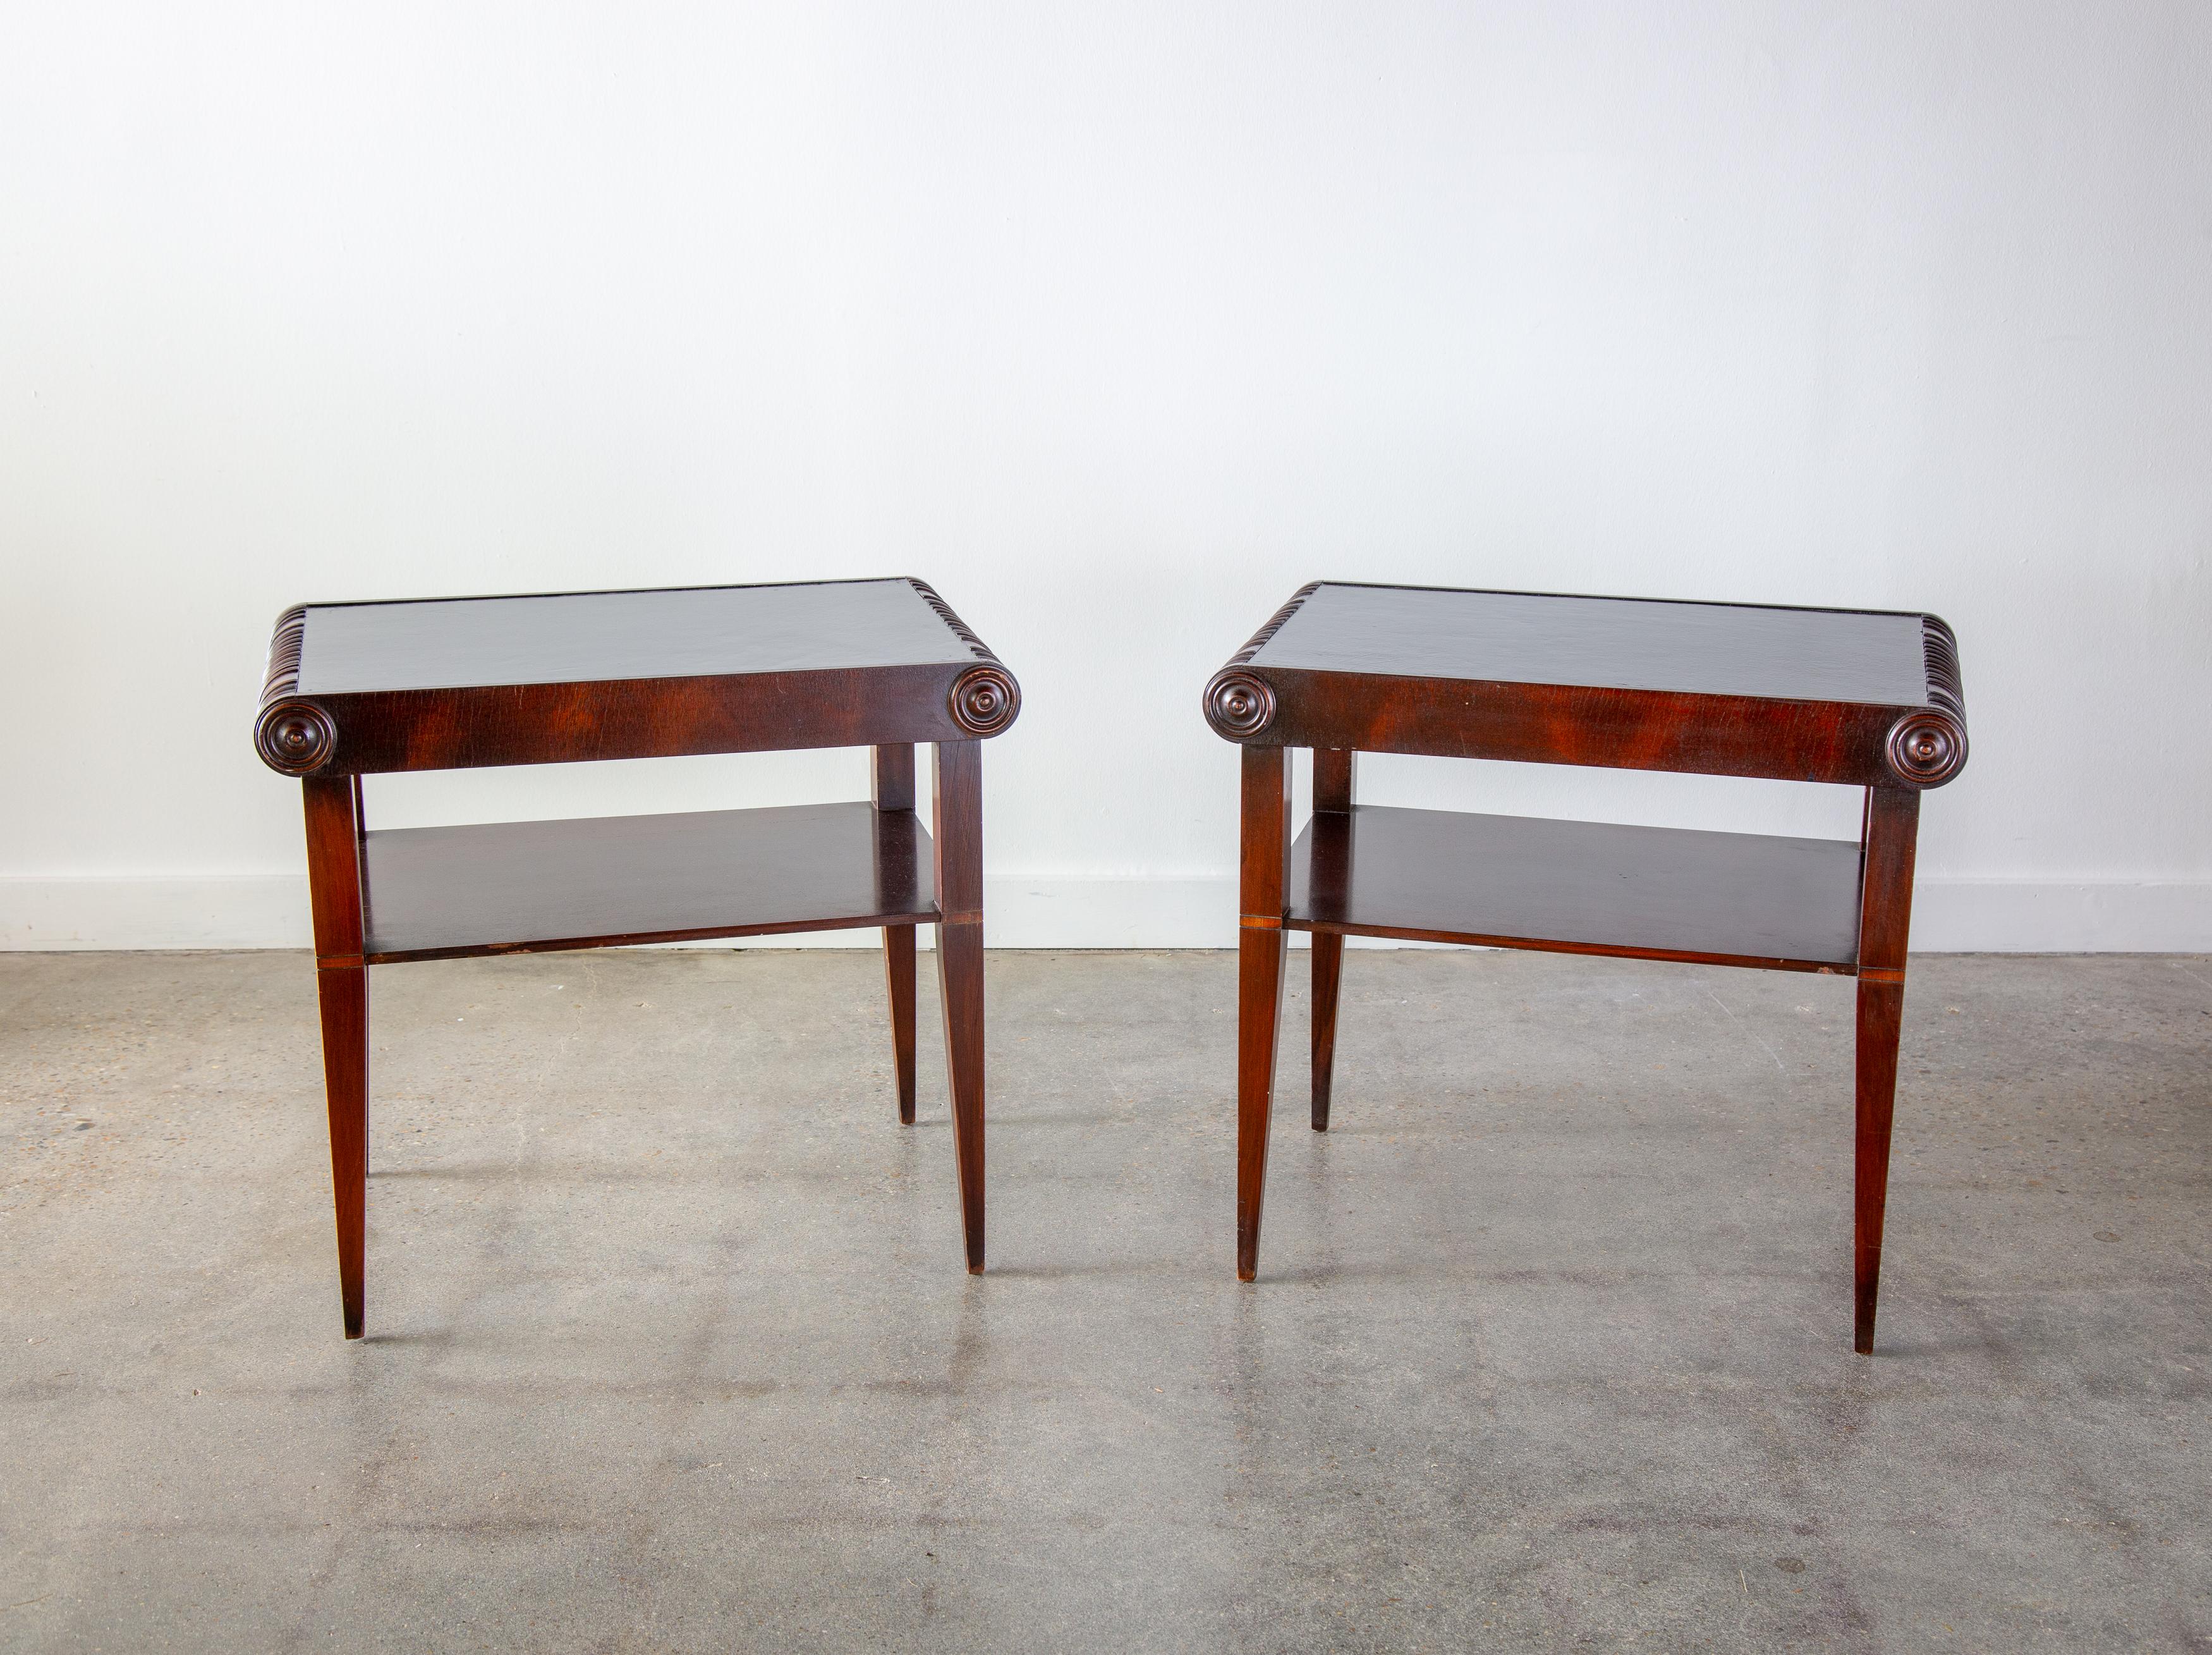 1920s Swedish Art Deco Leather top Mahogany End Tables Nightstands In Good Condition For Sale In Virginia Beach, VA